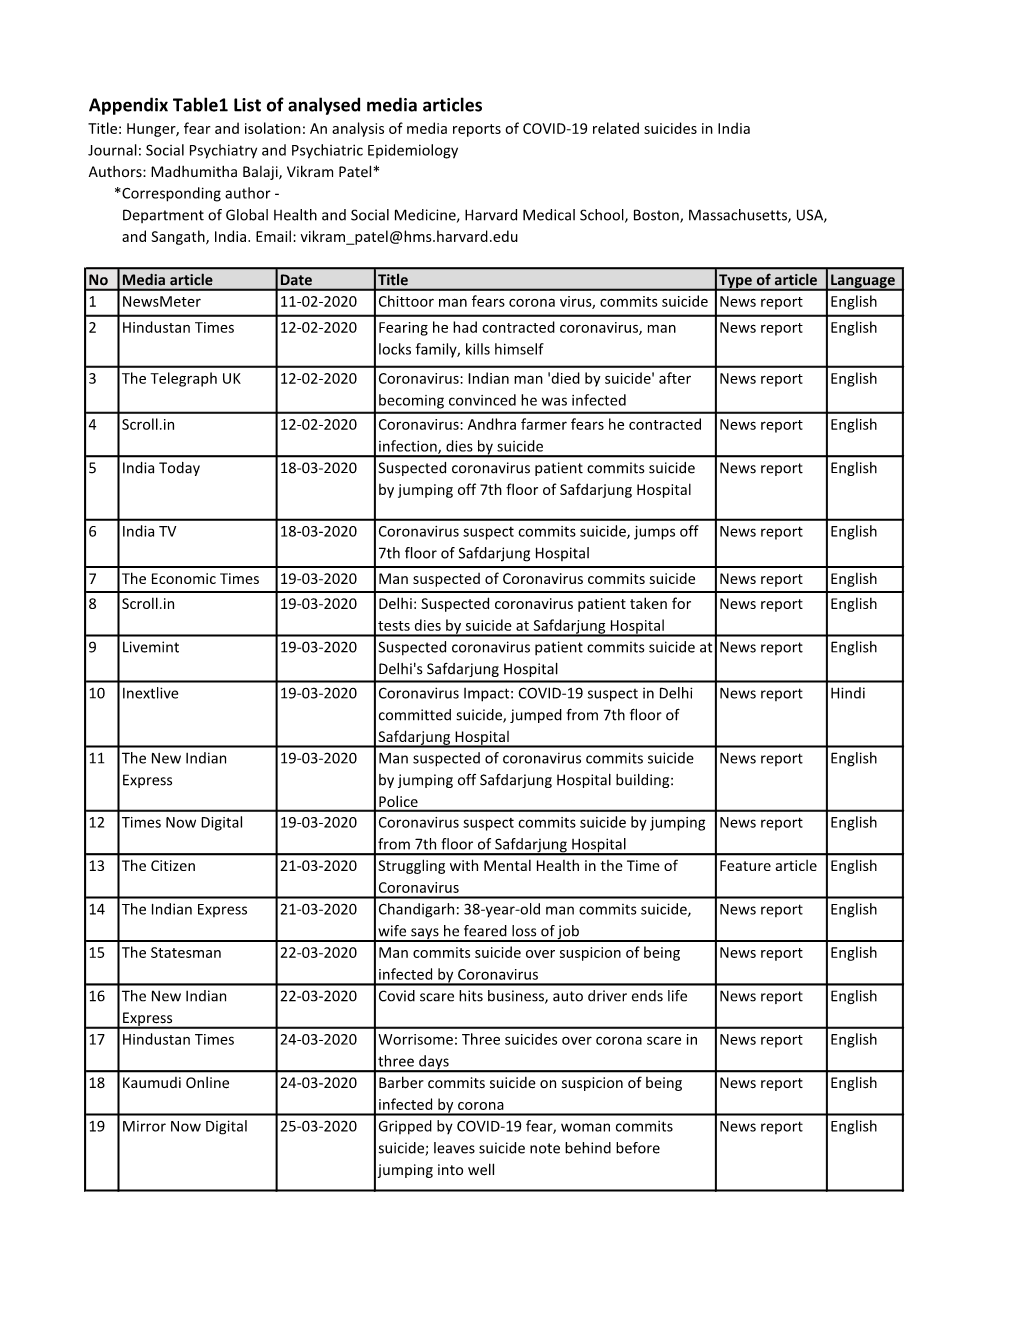 Appendix Table1 List of Analysed Media Articles